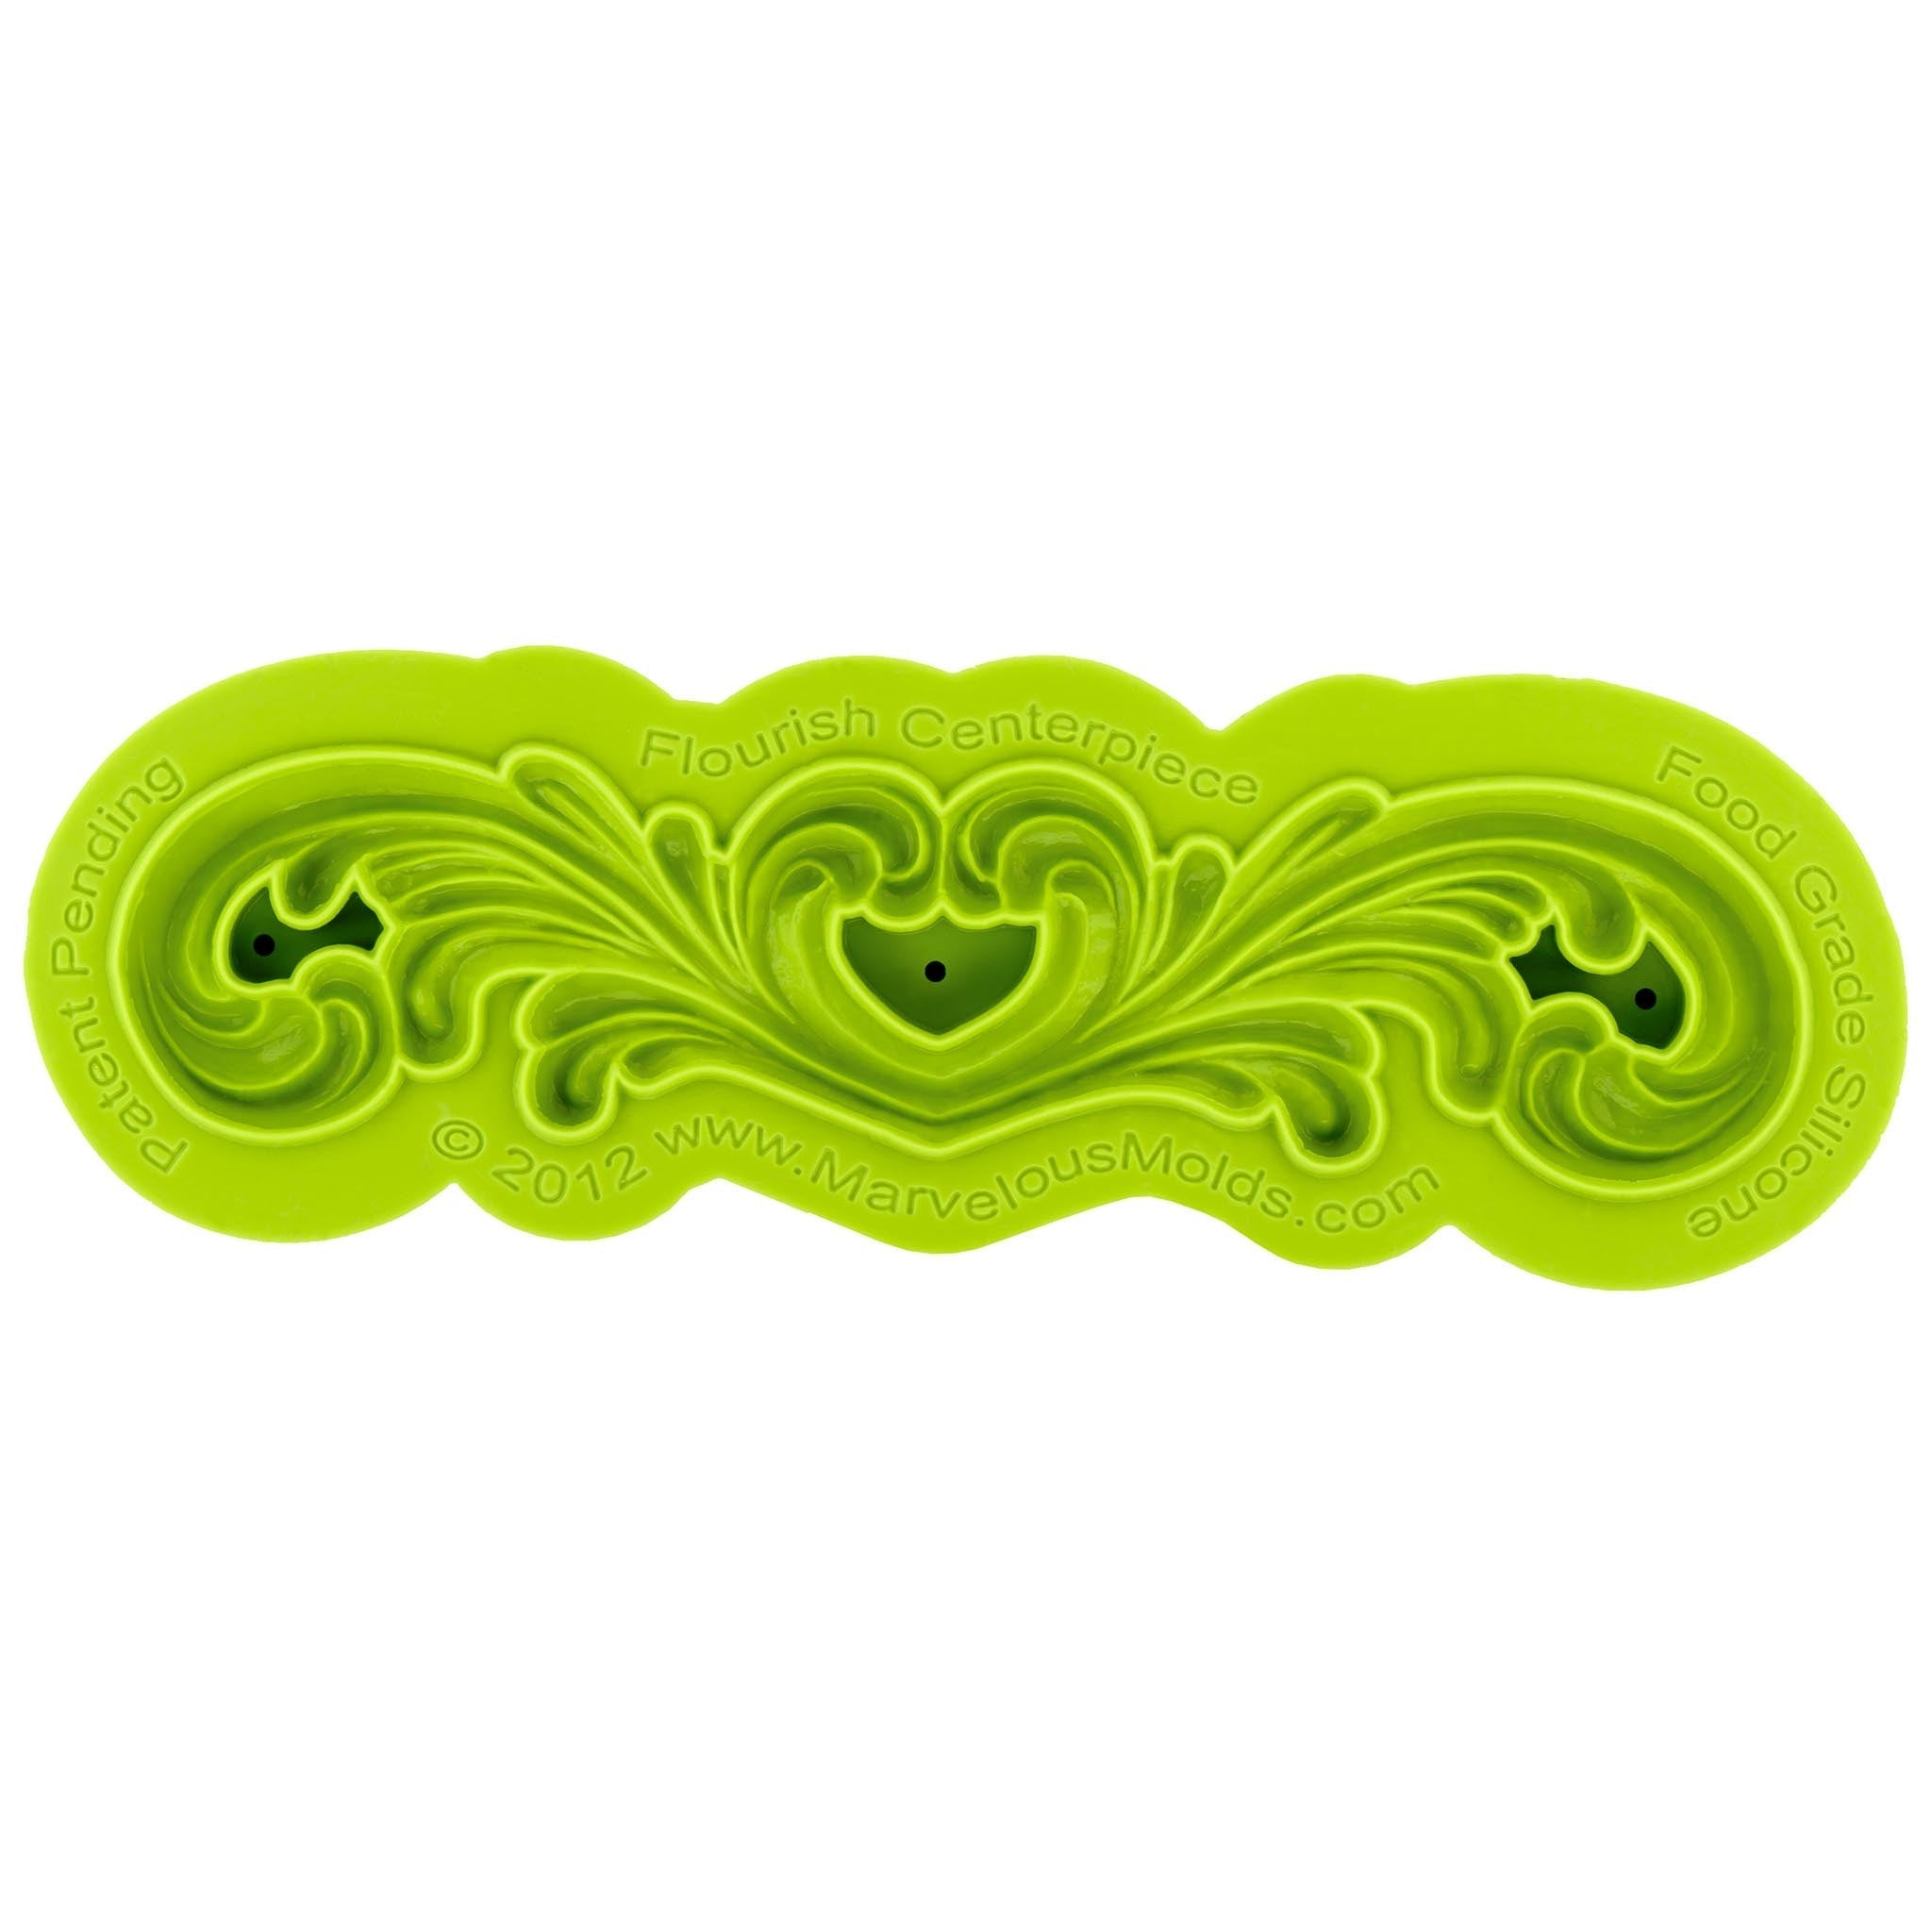 Flourish Centerpiece Silicone Mold for Cake Decorating and DIY Crafts